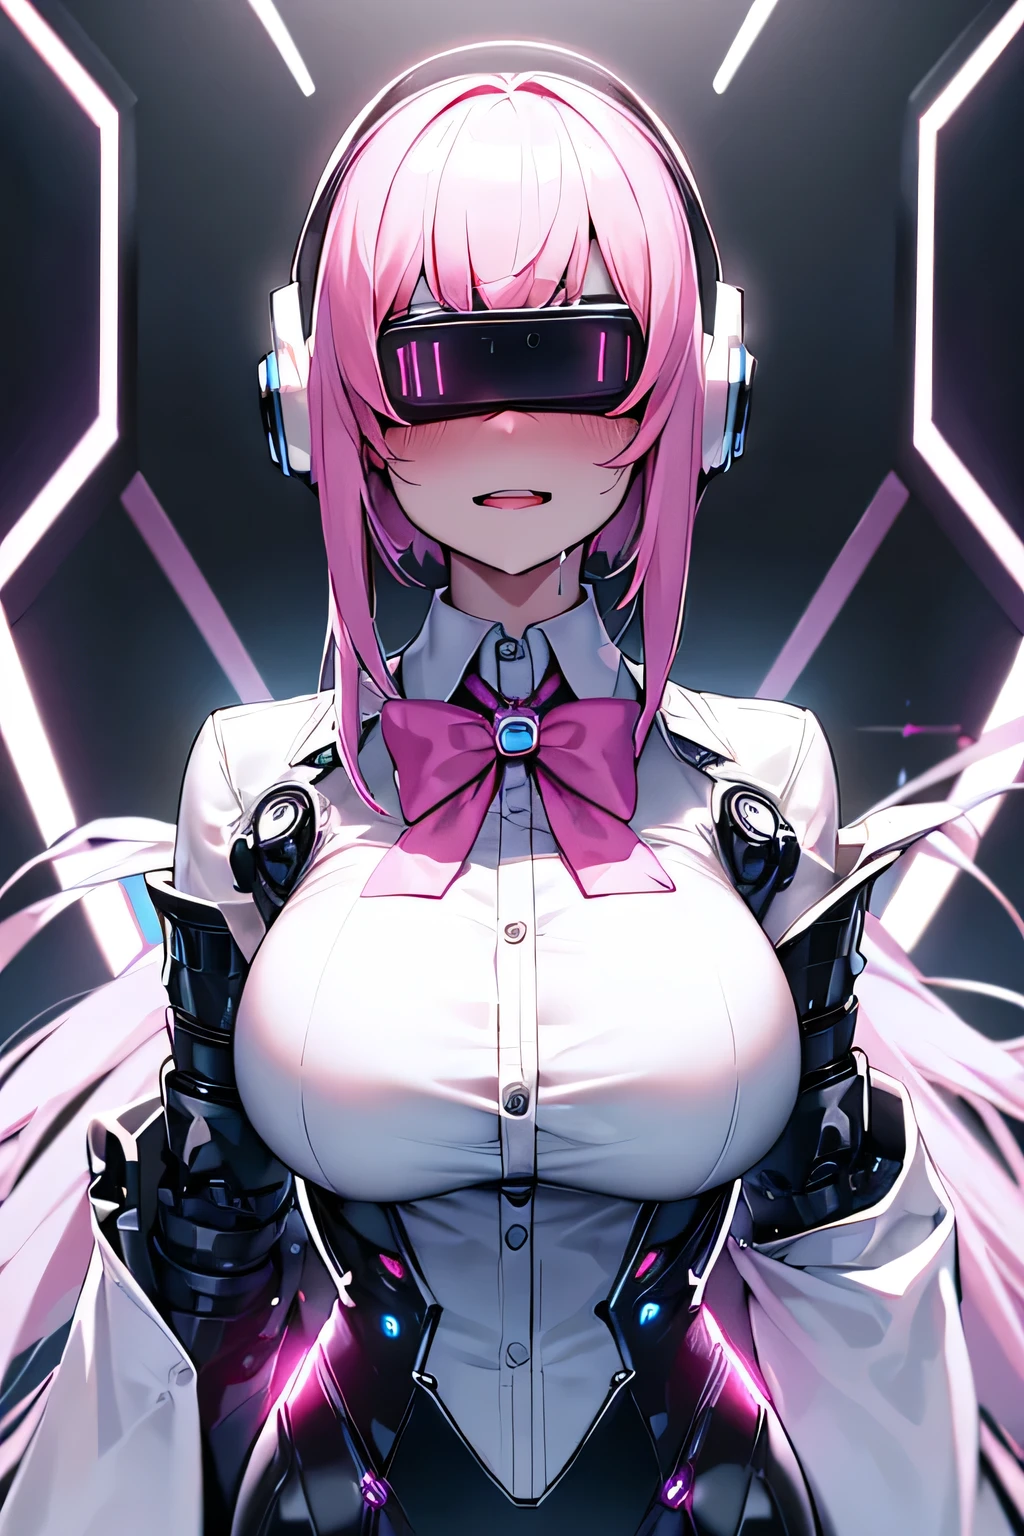 Anime cyborg girl sitting in a pilot seat wearing a virtual reality headset covering her eyes on her face with machinery and tubes and wires going inside her head and brain, (Best quality,highres:1.2), ultra-detailed, (realistic:1.3), cyberpunk, futuristic, portrait, shiny revealing latex outfit, cyber implants, virtual reality, drooling face, cables plugging into brain, shirt collar, bowtie, formal clothing, open mouth smile, facing viewer, girl is vibrating, glowing virtual reality headset, relaxed expression, blushing, cyber future formal wear, cyberpunk, futuristic, brain drain, cyber implants, virtual reality, drooling face, virtual reality headset covering eyes,  , big collar, high collar, open mouth smile, pleasured face expression, skin tight clothing, big shirt collar, big bowtie, biggest breasts in the world, light-emitting cable connected to brain, head antennas, oversized headphones, breasts are vibrating, open mouth drooling, blank expression, red face blush, cyborg, android, mechanical creature, mechanical torso, futuristic cyberpunk cyborg body, slim futuristic android, glowing lights on girls body, power cells, head is emitting pink light, formal shirt collar, big formal bowtie, , glowing nipples, big shirt collar, high collar, white collar, electrocution, girl being electrocuted, electricity, electricity sparks, pink hair, short hair, neon pink hair, body modification, orgasm, pleasure, (VR headset covering the eyes), vibrating breasts, vibrating girl, intense vibration, glowing nipples, lightbulb nipples, girl wearing large VR headset, glowing eyes, blank eyes, focused face expression, buttoned up white dress shirt, formal shirt with huge collar